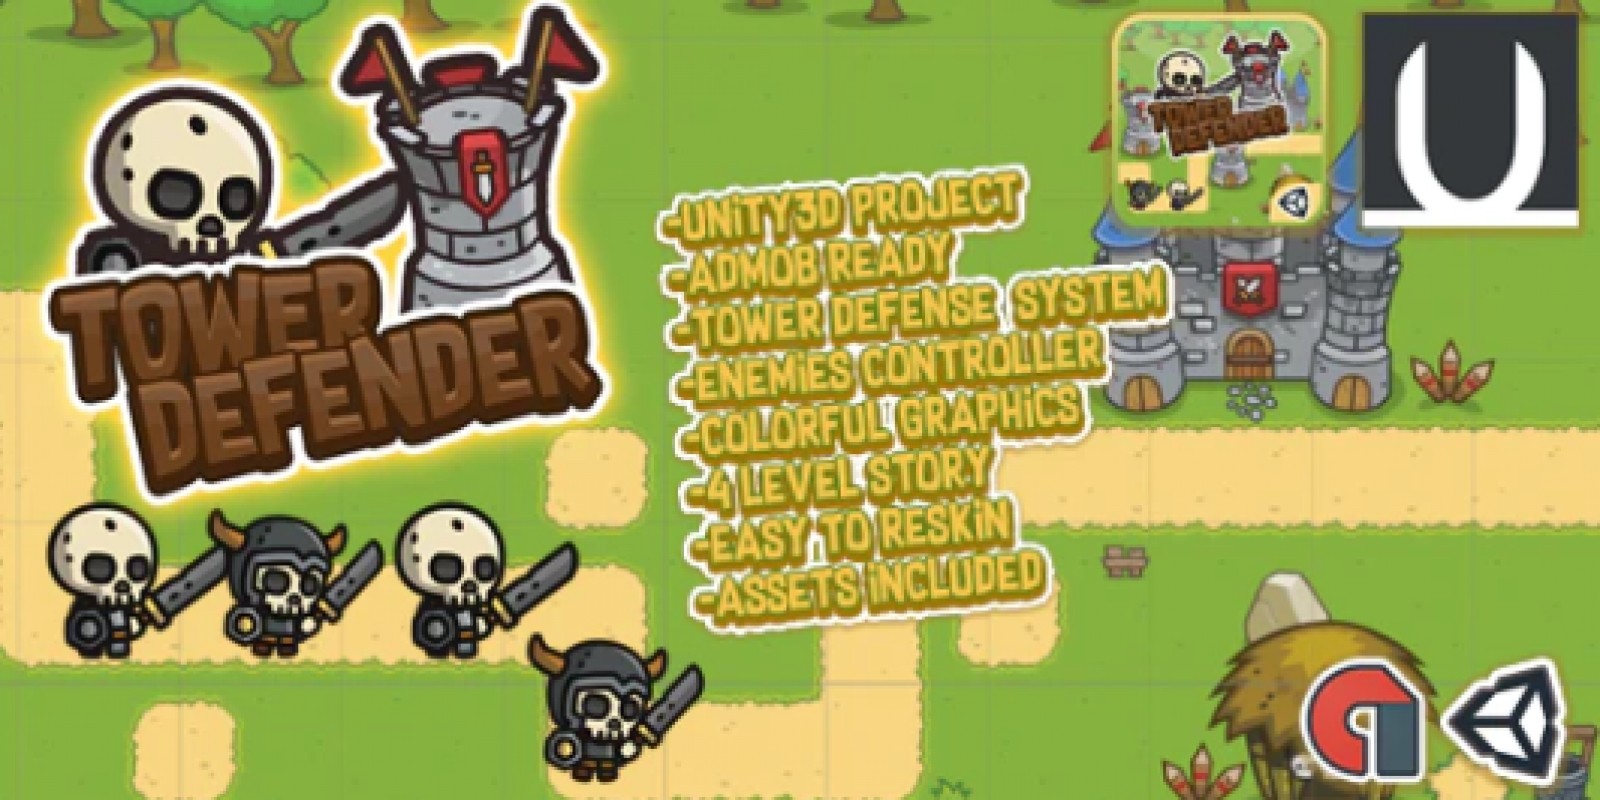 Tower Defender - Unity3D Game Source Code by Ultraviolet ...